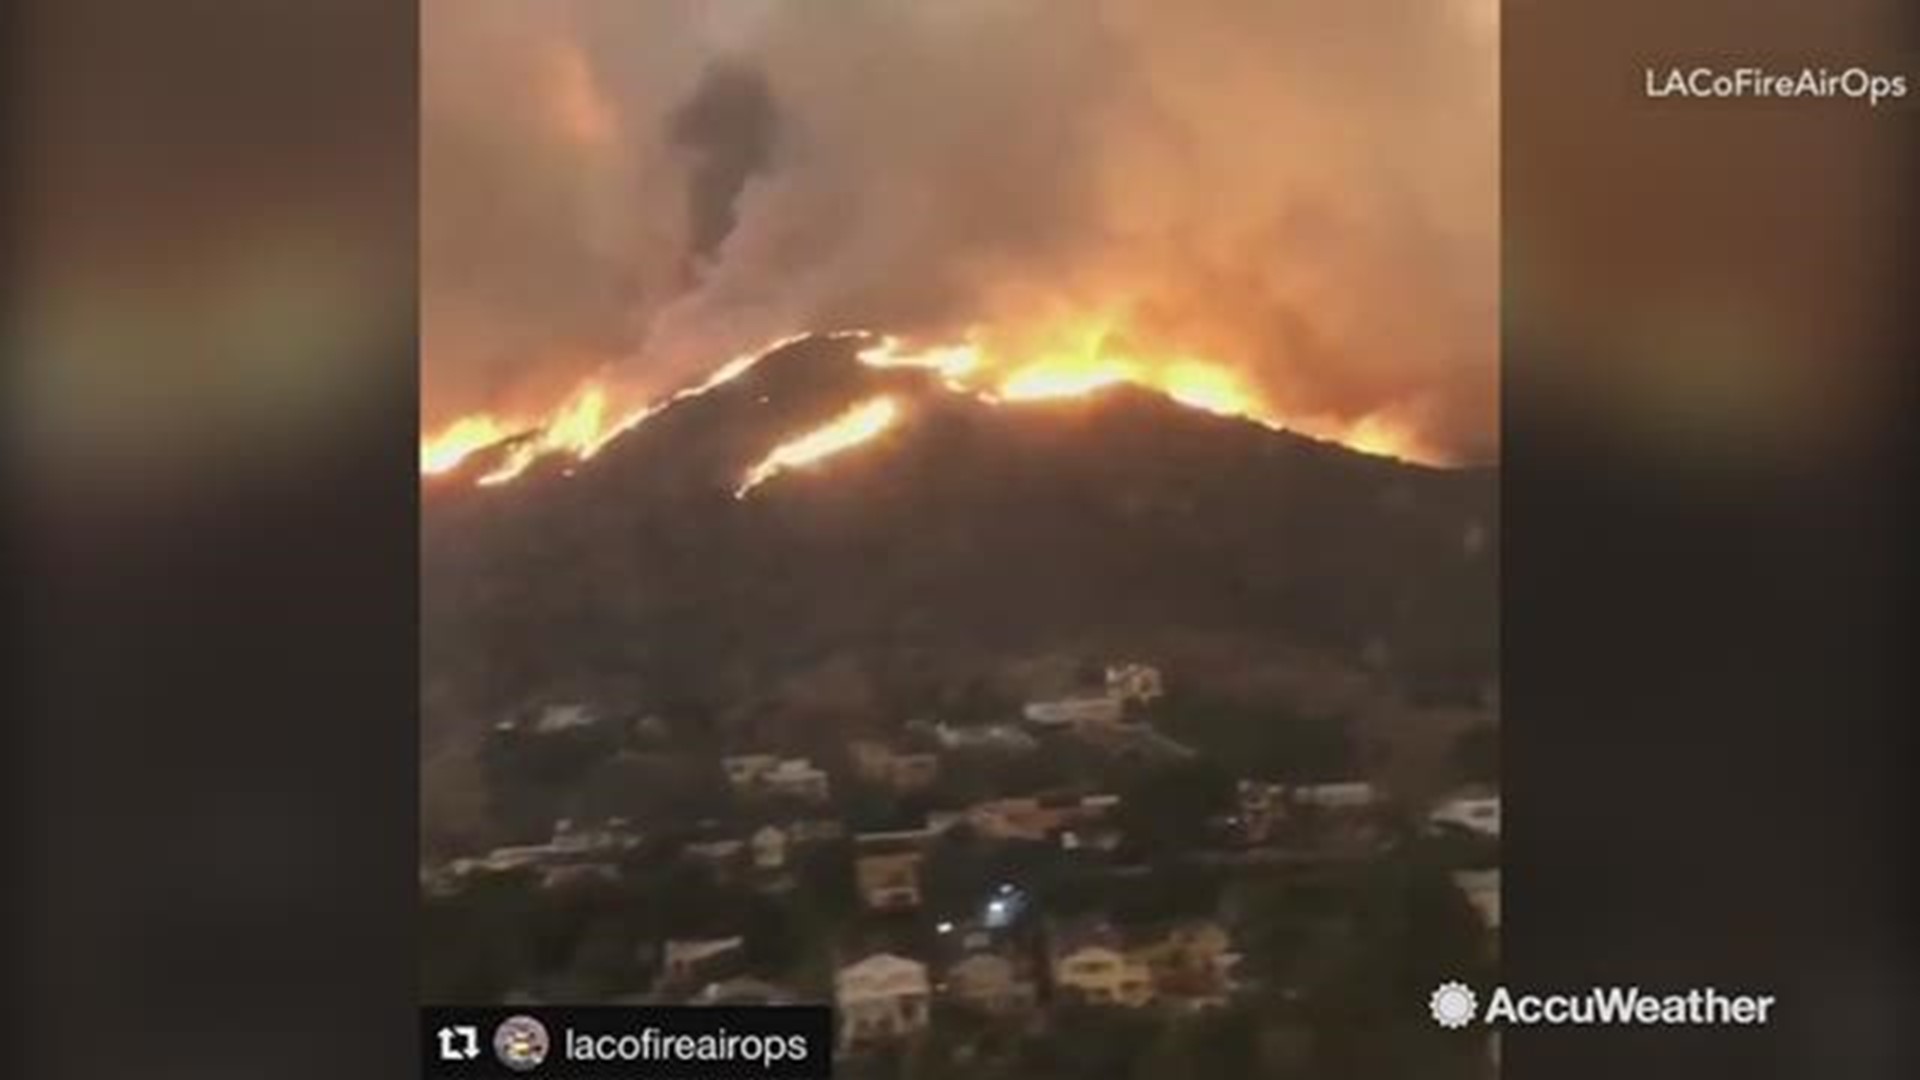 This video captured by the Los Angeles County Fire Department Air Operations Section shows the hills near Malibu, California engulfed in flames from the Woolsey Fire. Residents of Malibu were evacuated as the fire moves closer to the town and shore.